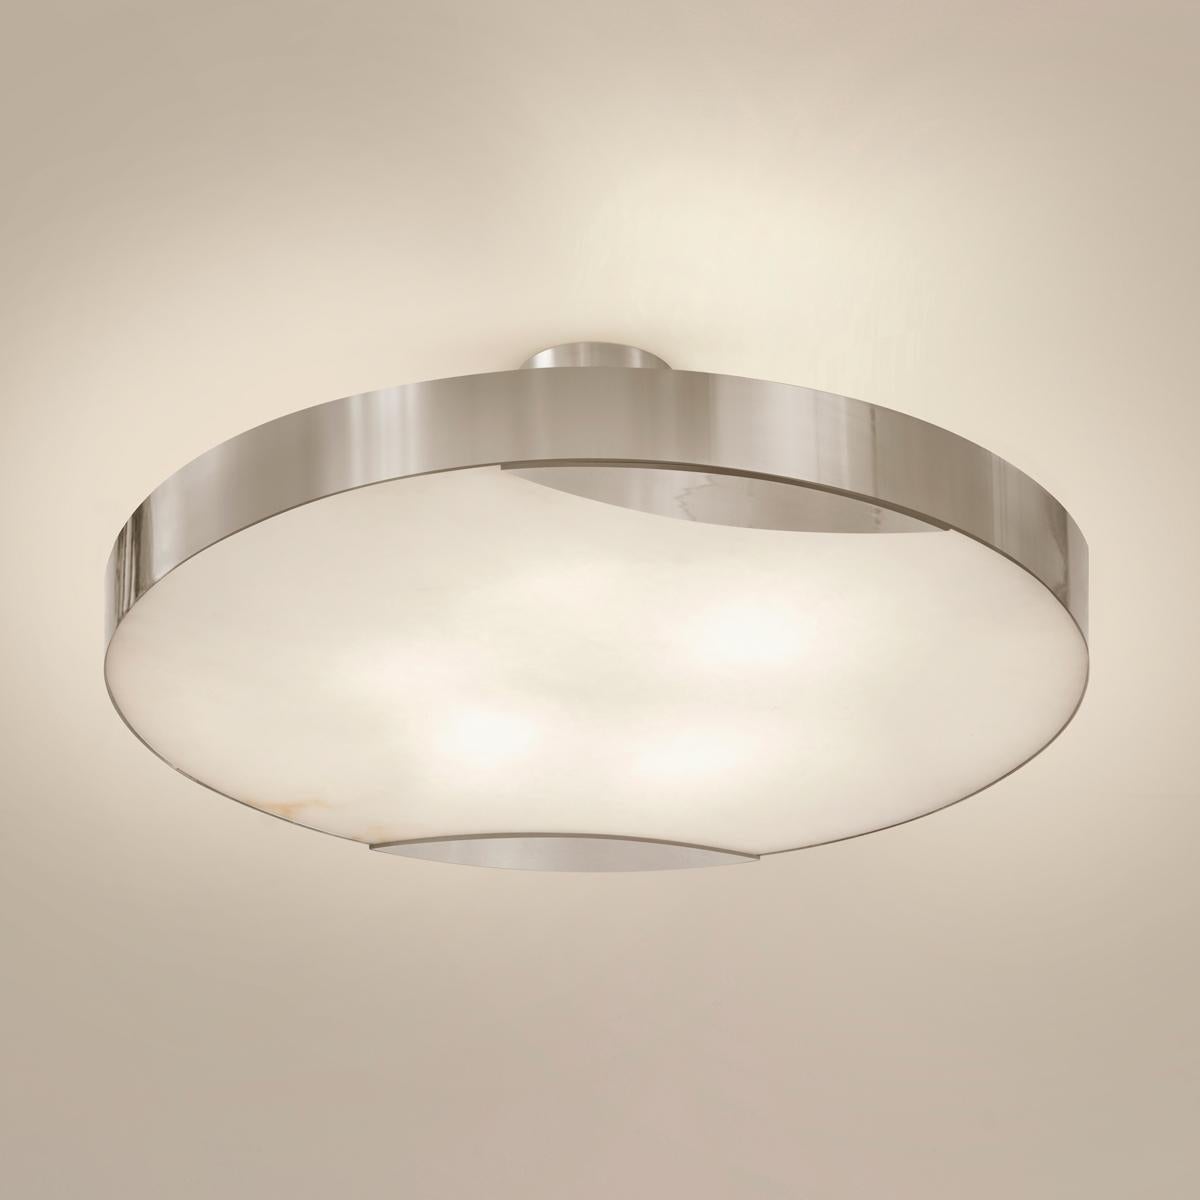 Cloud N.1 Ceiling Light by Gaspare Asaro-Satin Brass Finish For Sale 1